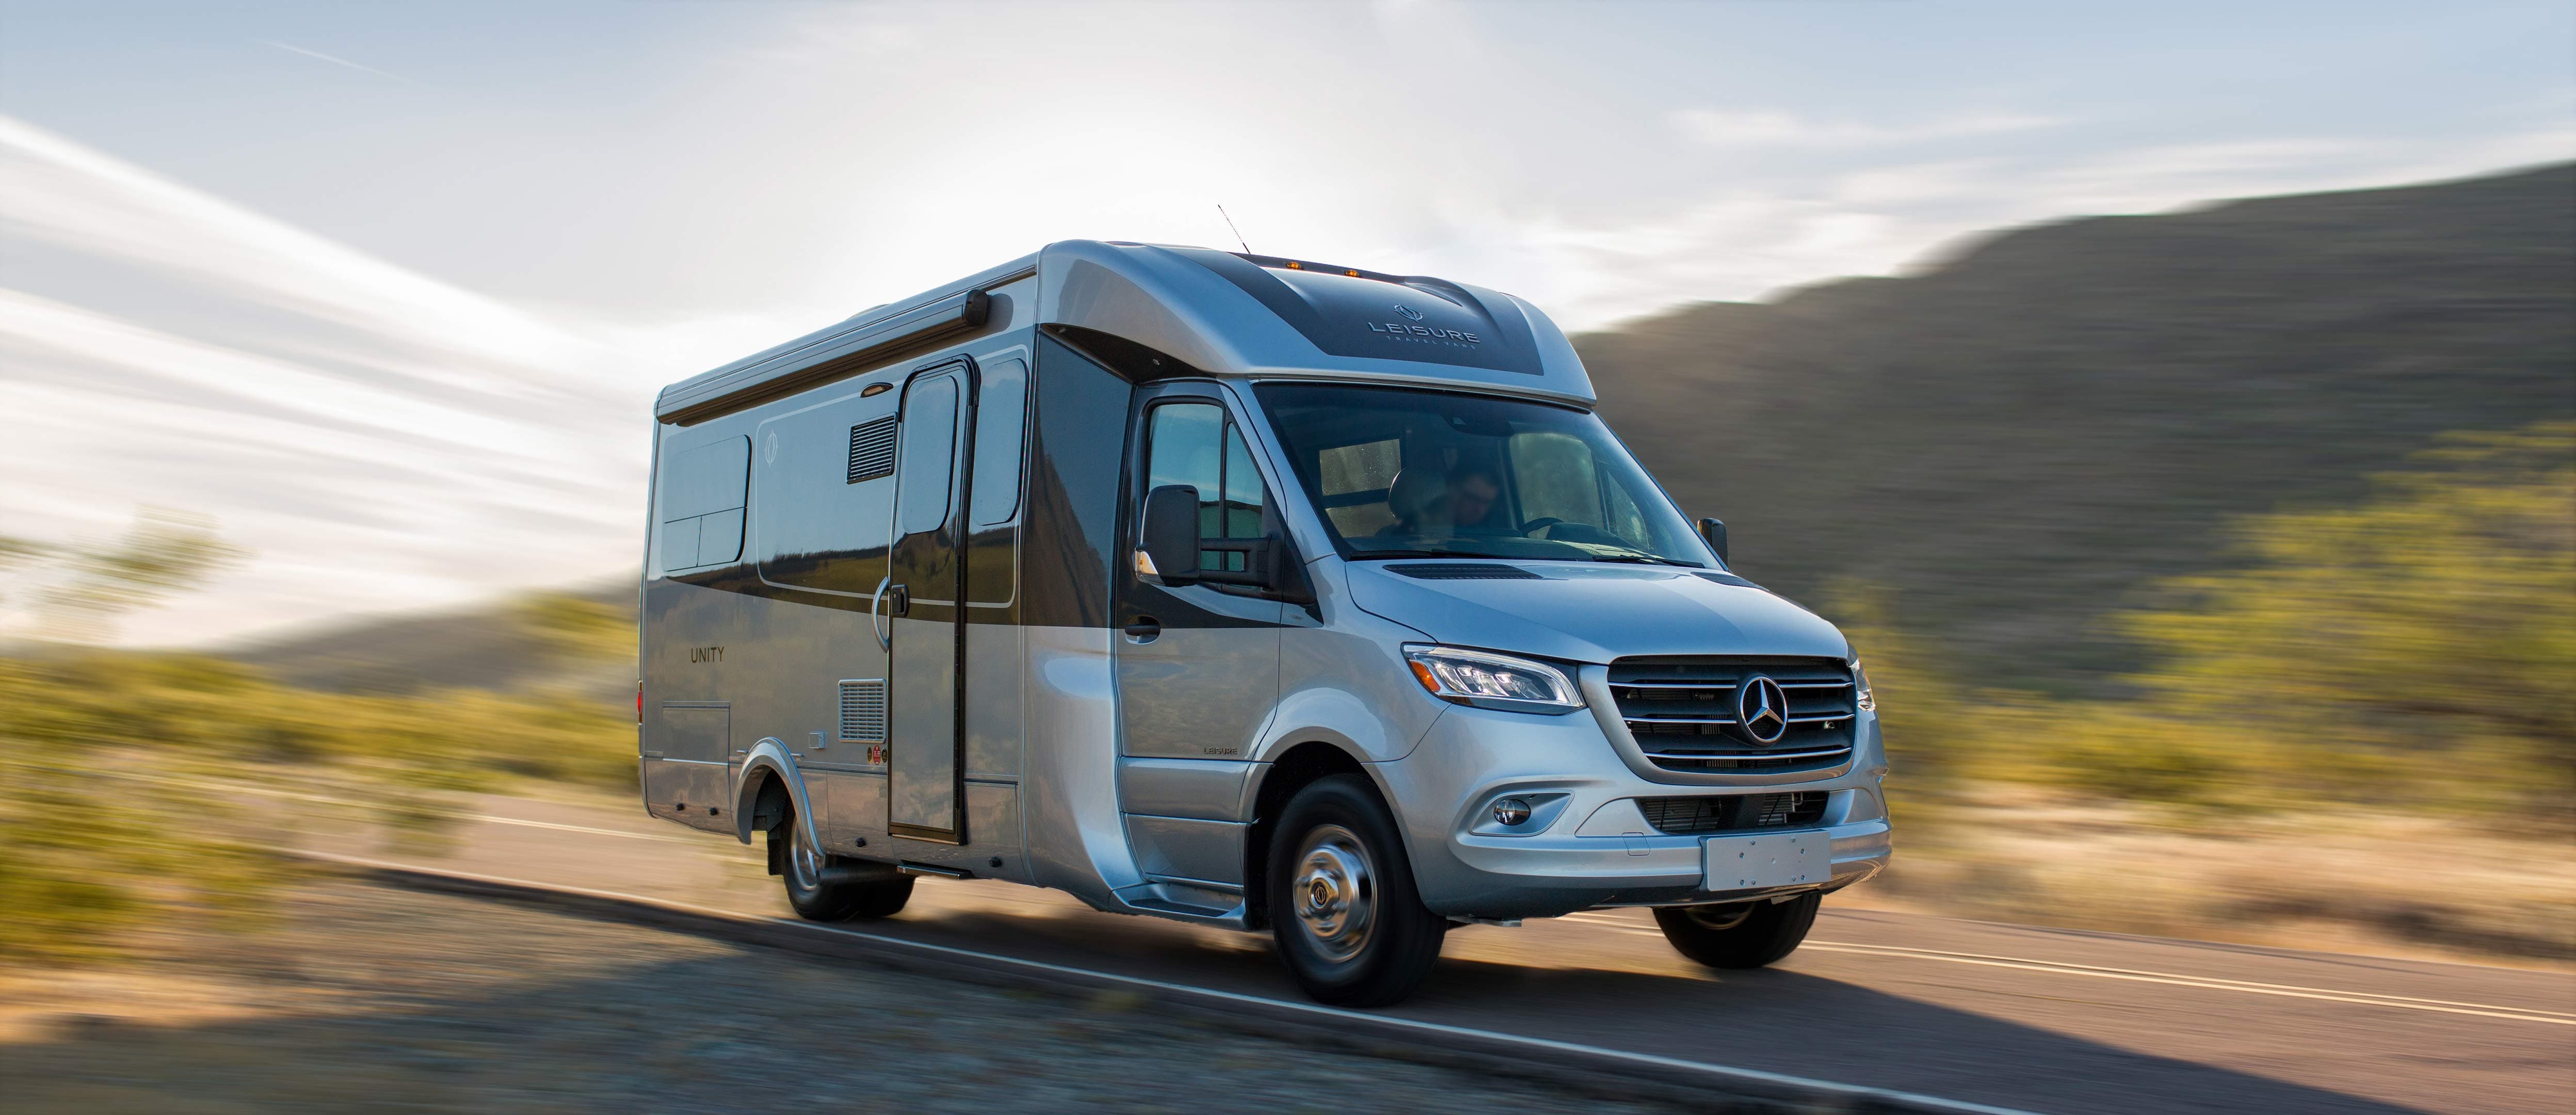 2019 mercedes sprinter chassis